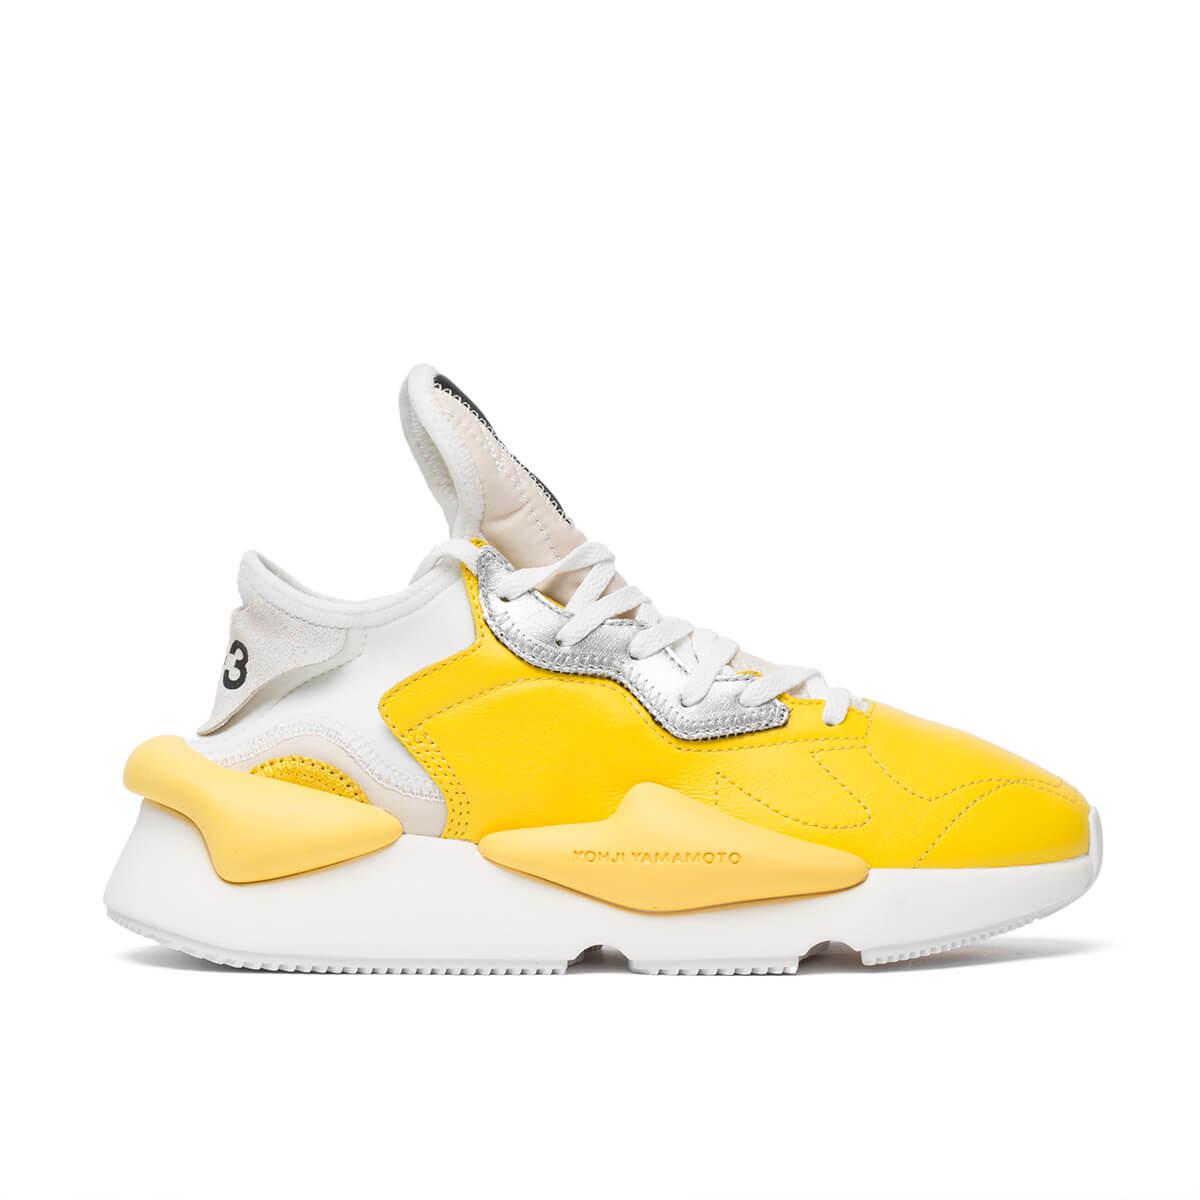 Y-3 Leather Kaiwa Sneakers in Yellow 